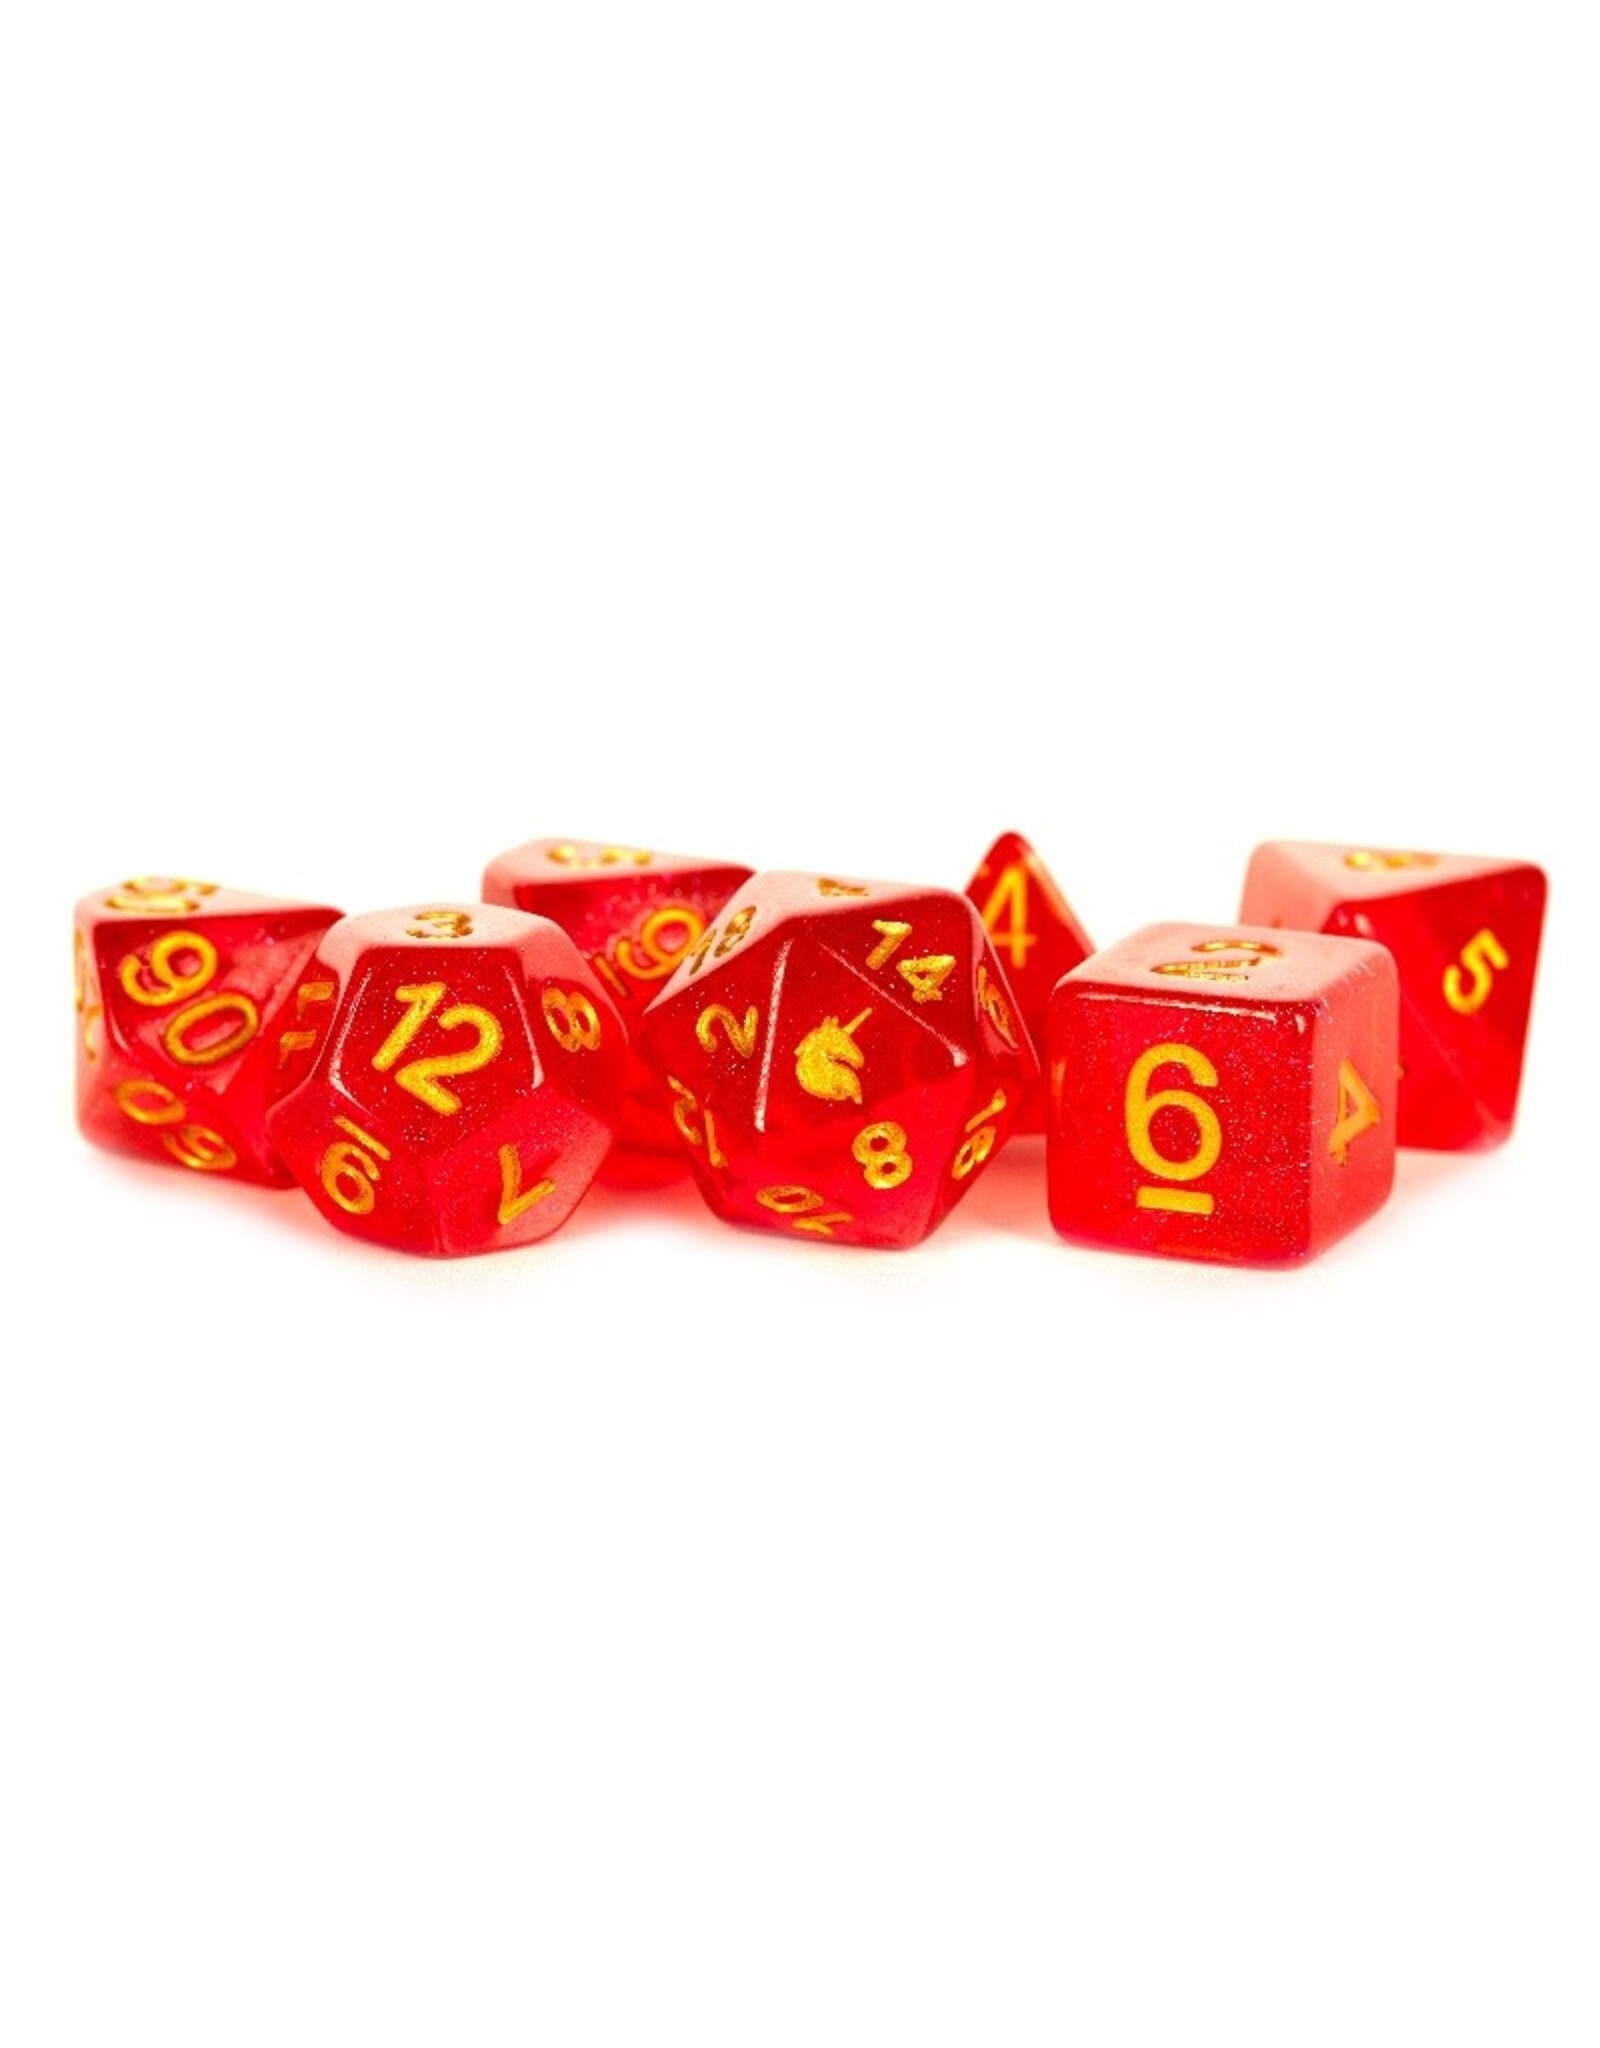 Polyhedral Dice Set: Unicorn - Red